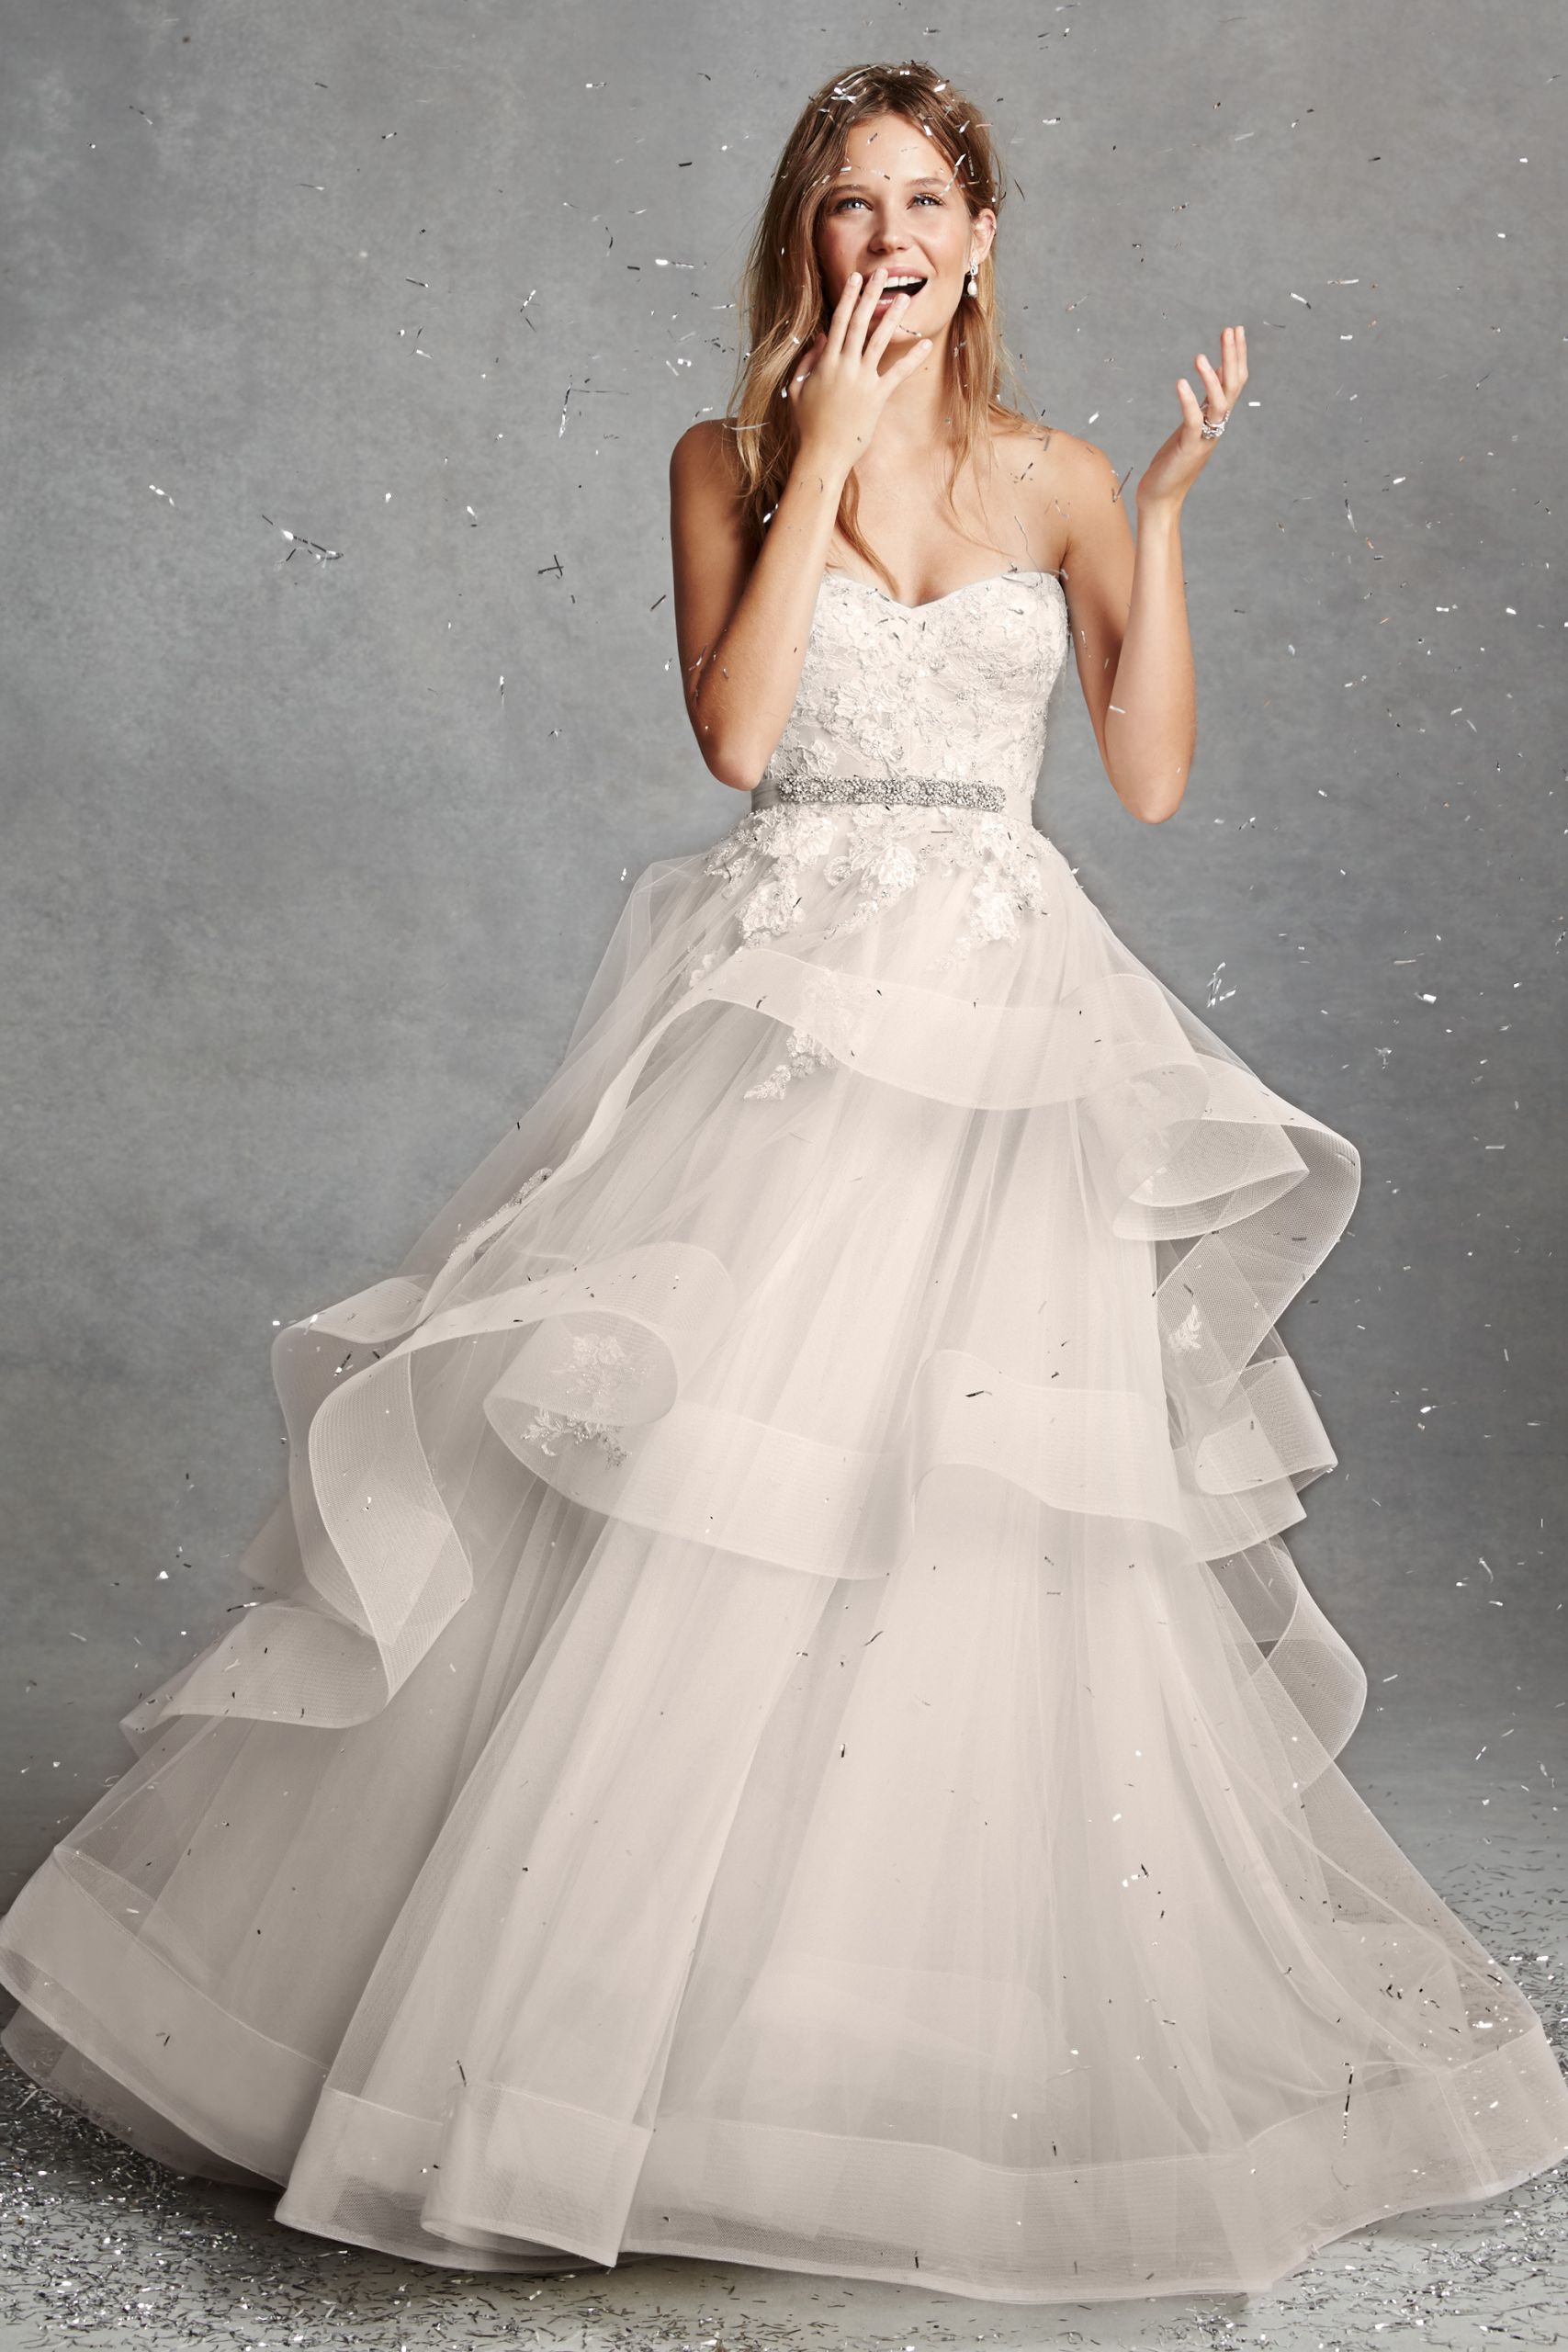 How Much Are Monique Lhuillier Wedding Gowns
 Monique Lhuillier Bliss Spring 2015 CAN T FIND THE PRICE